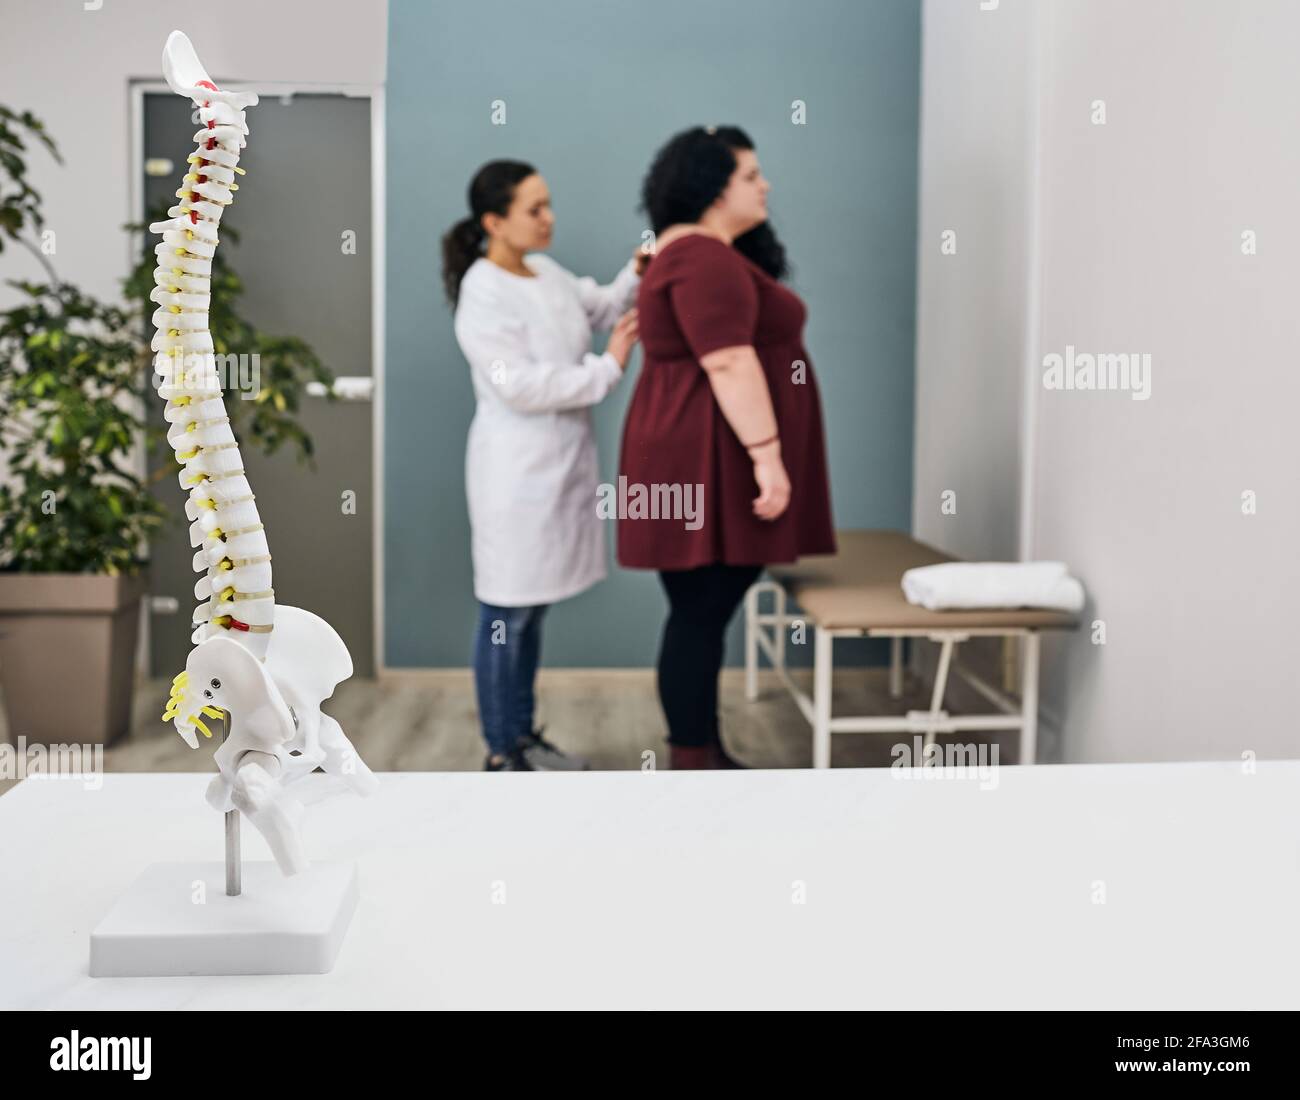 Protrusion and herniation disc in obese people. doctor examines a overweight woman patient's spine Stock Photo